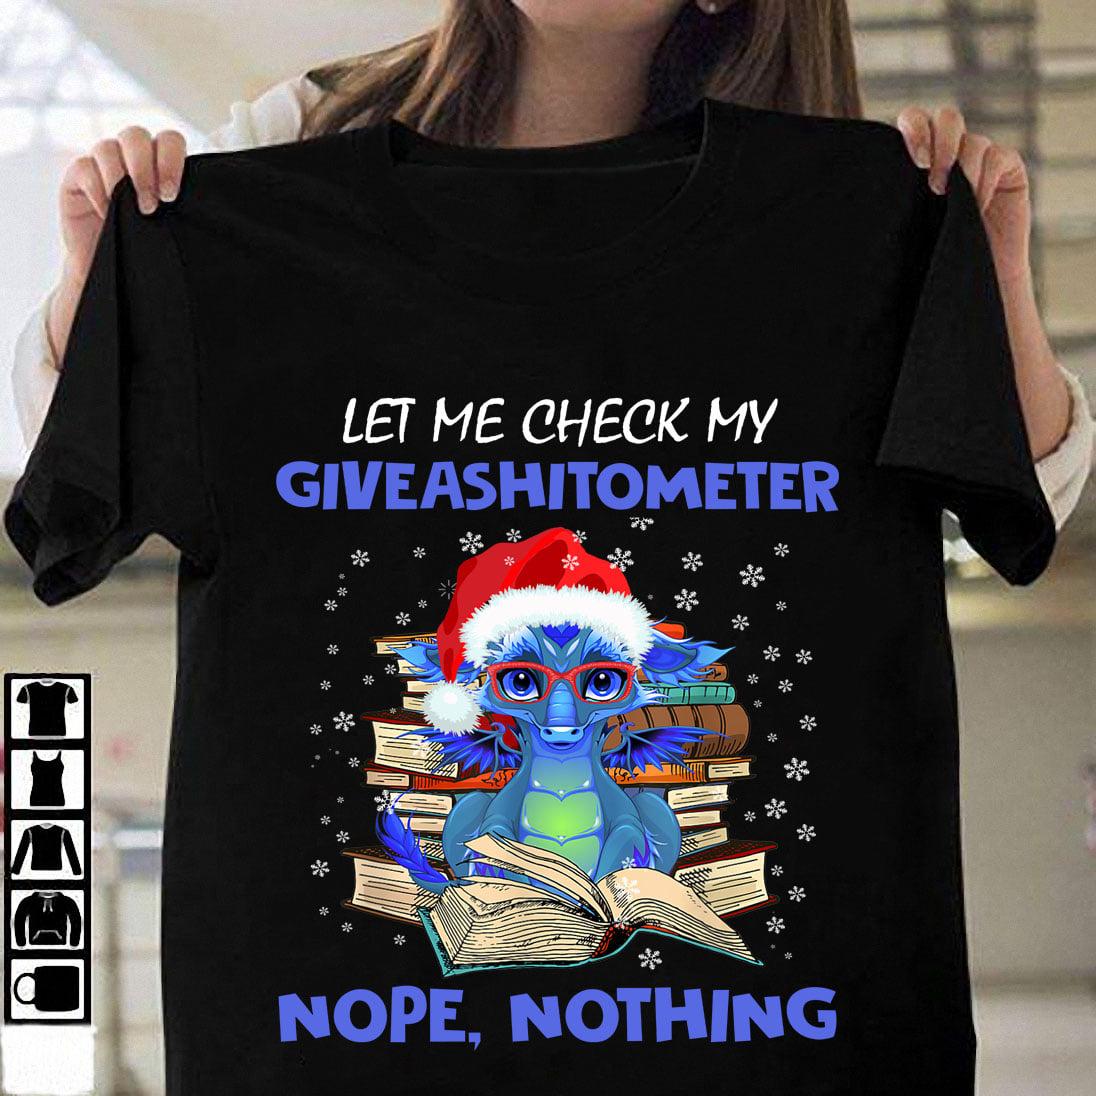 Let me check my giveashitometer - Dragon reading books, Christmas day ugly sweater